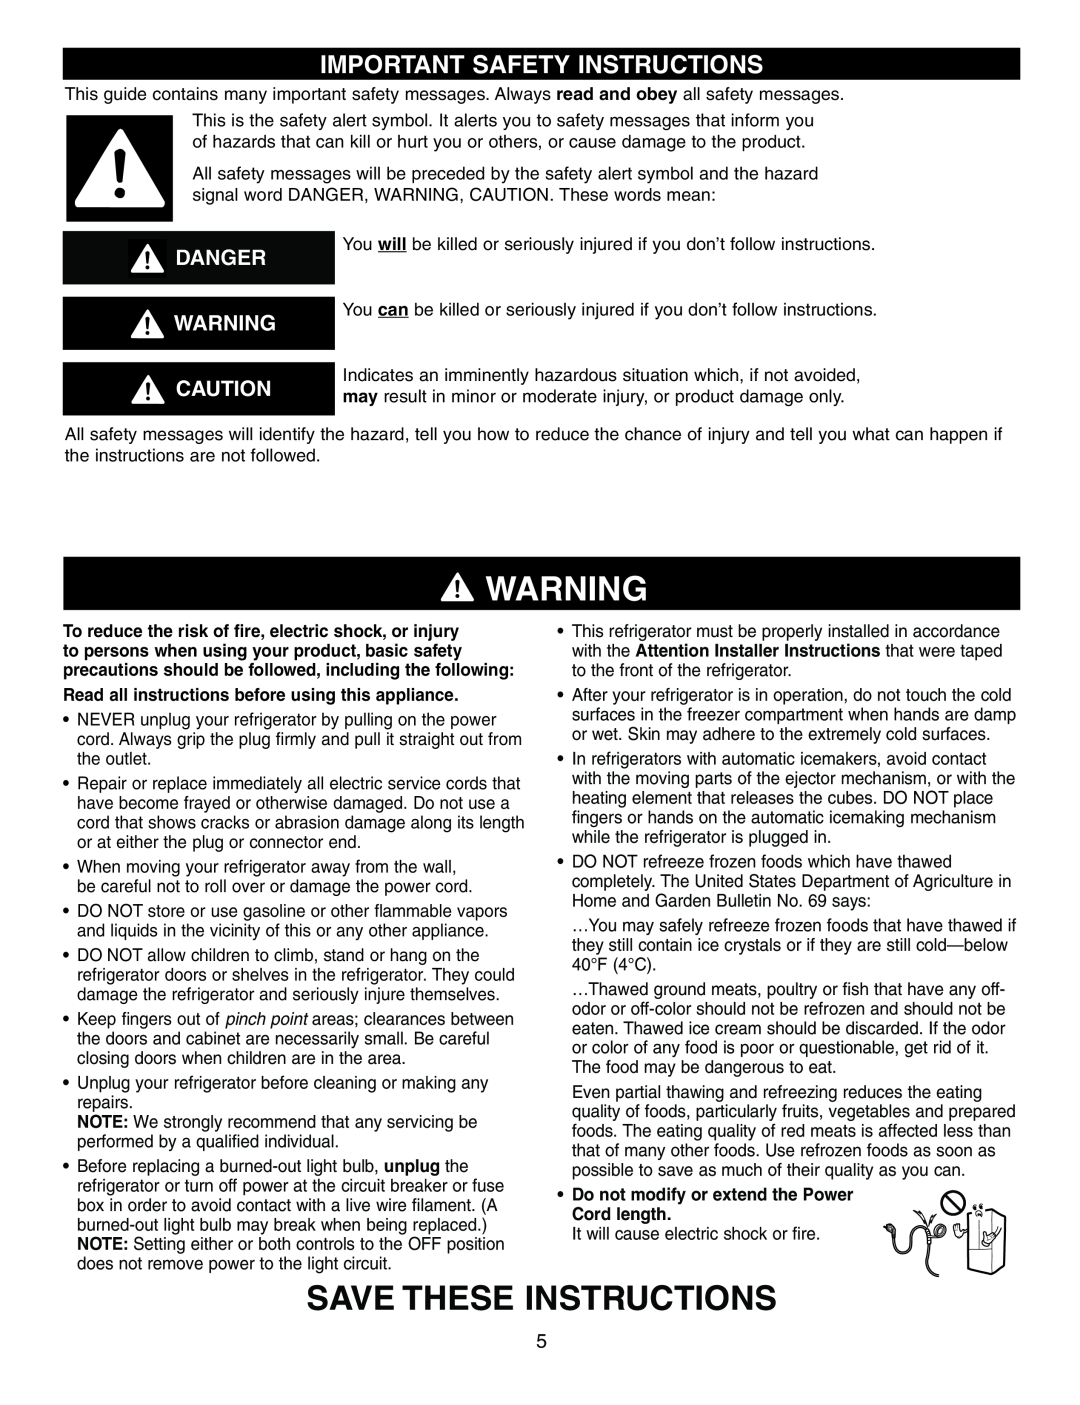 LG Electronics LRFD21855, LRFD25850 manual Save These Instructions, Important Safety Instructions, Danger 